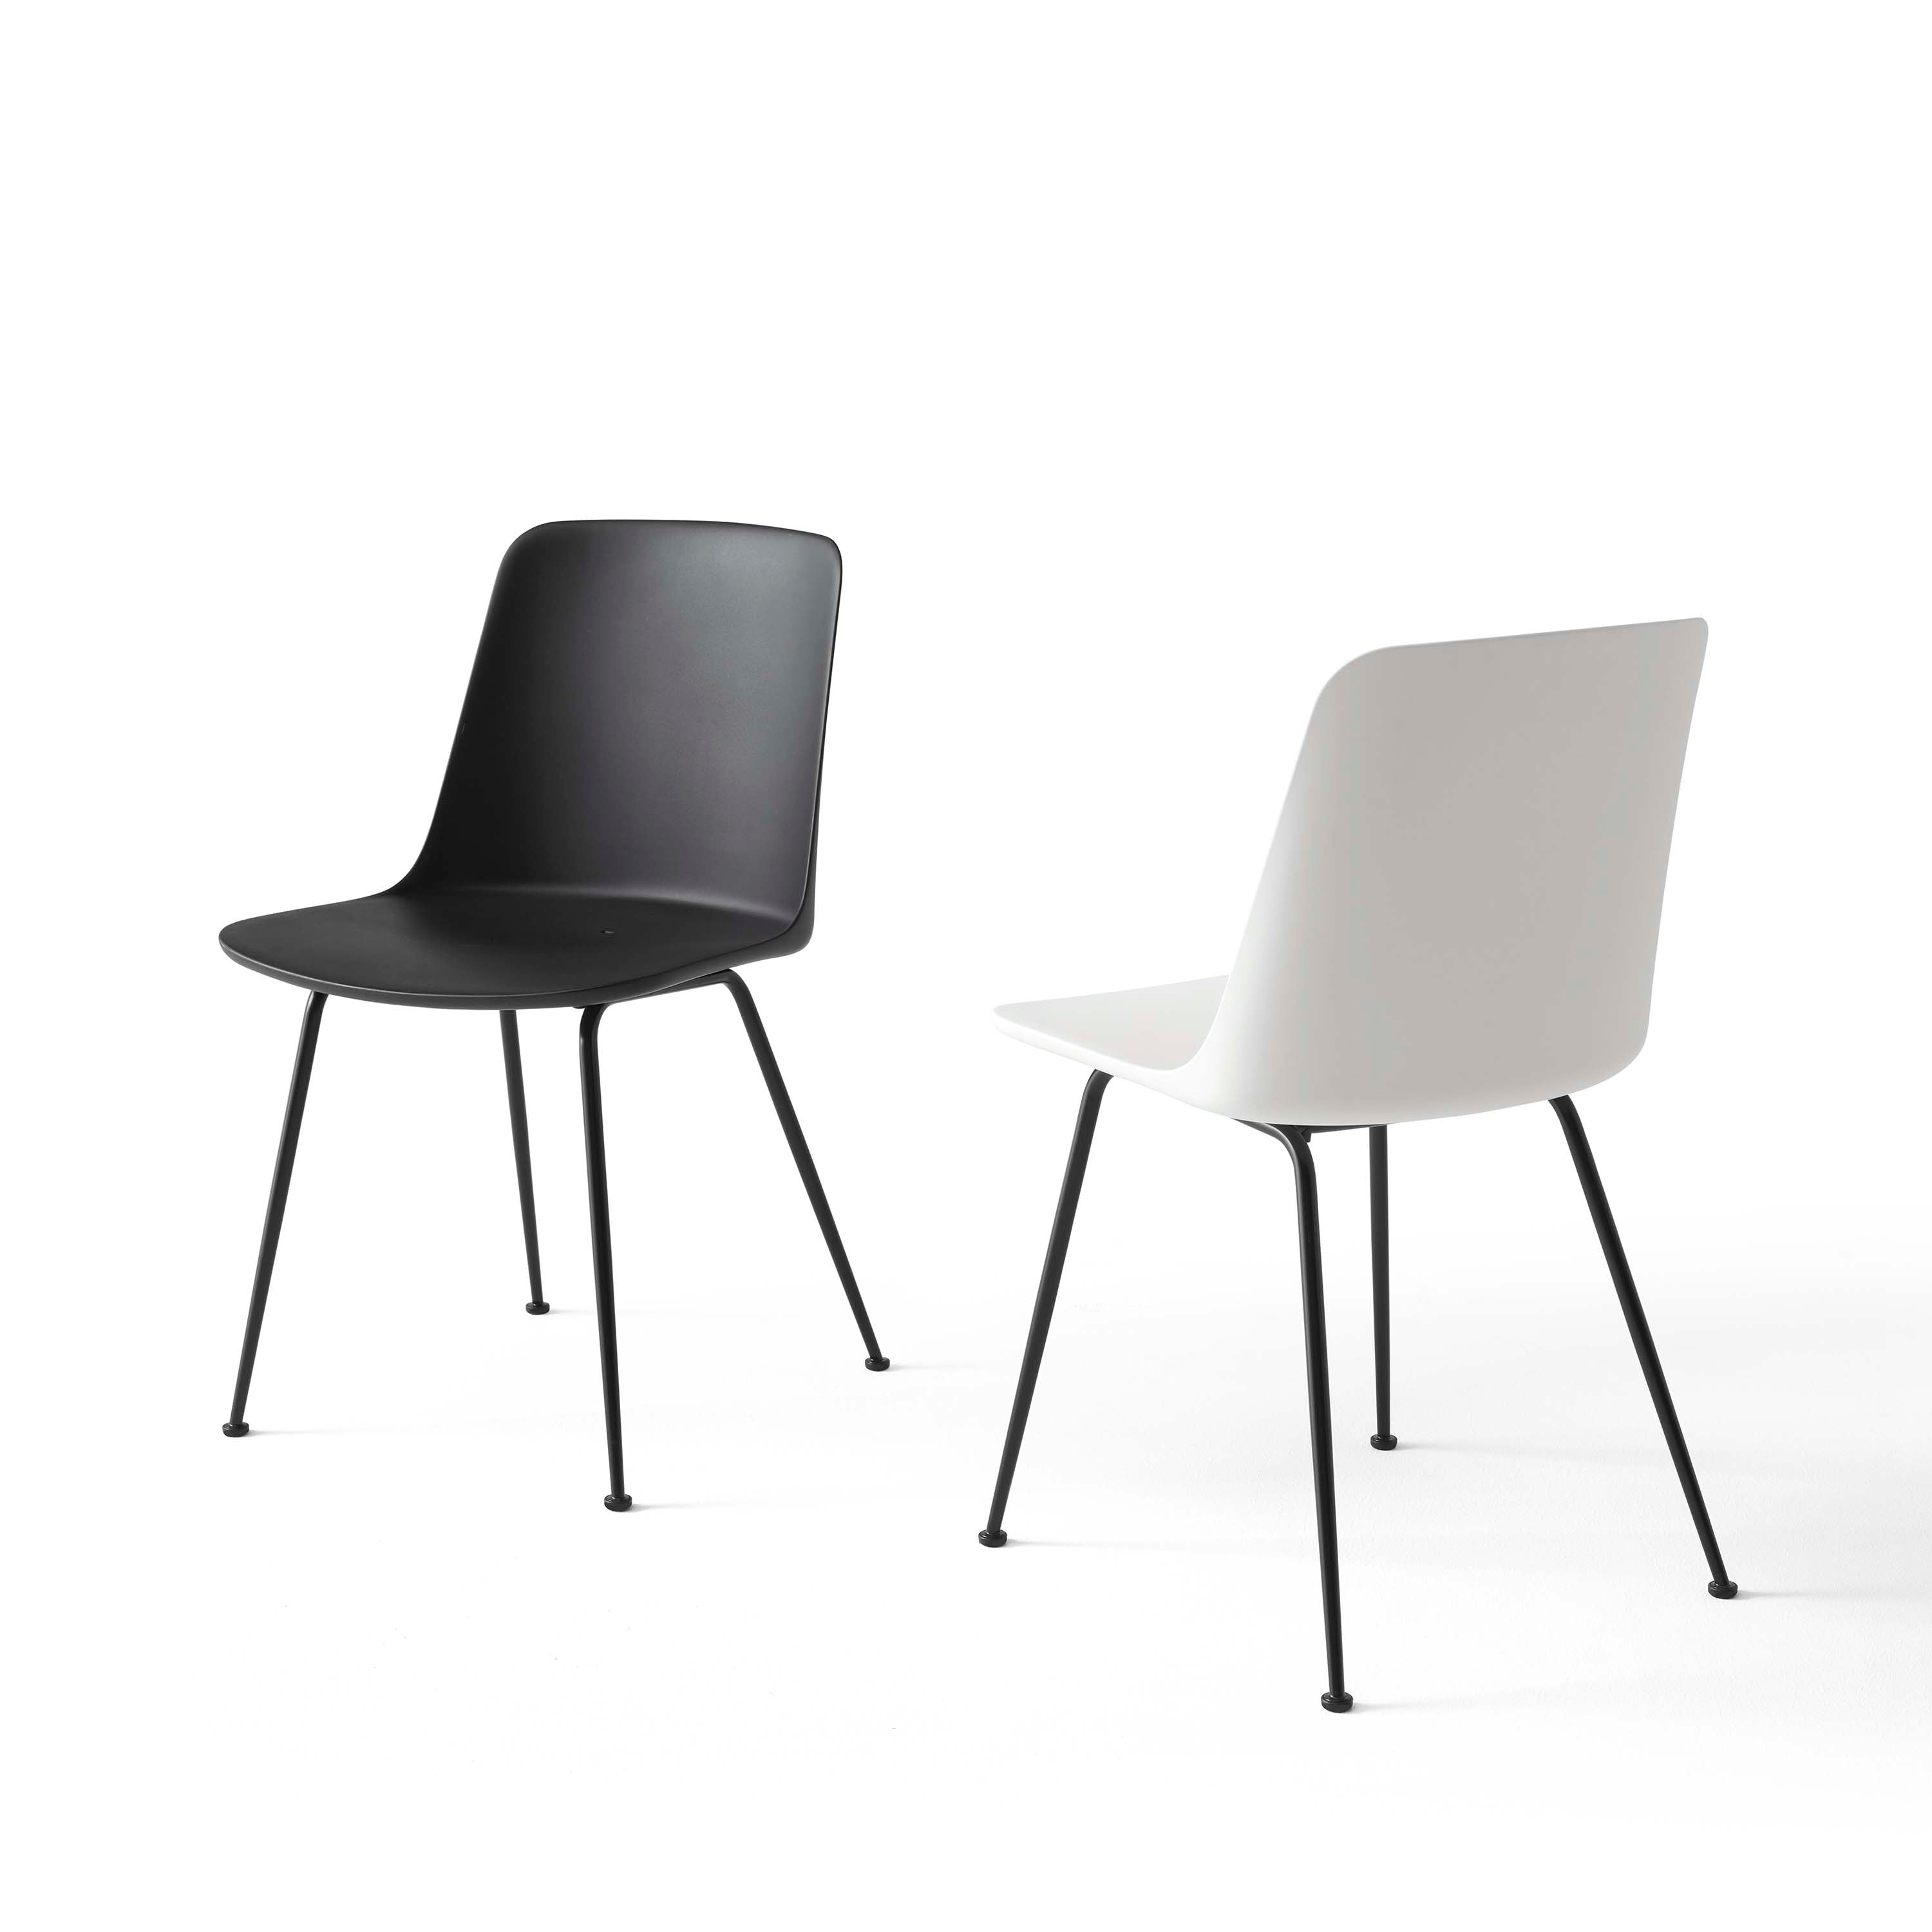 Rely Outdoor Chair HW70: Black + White